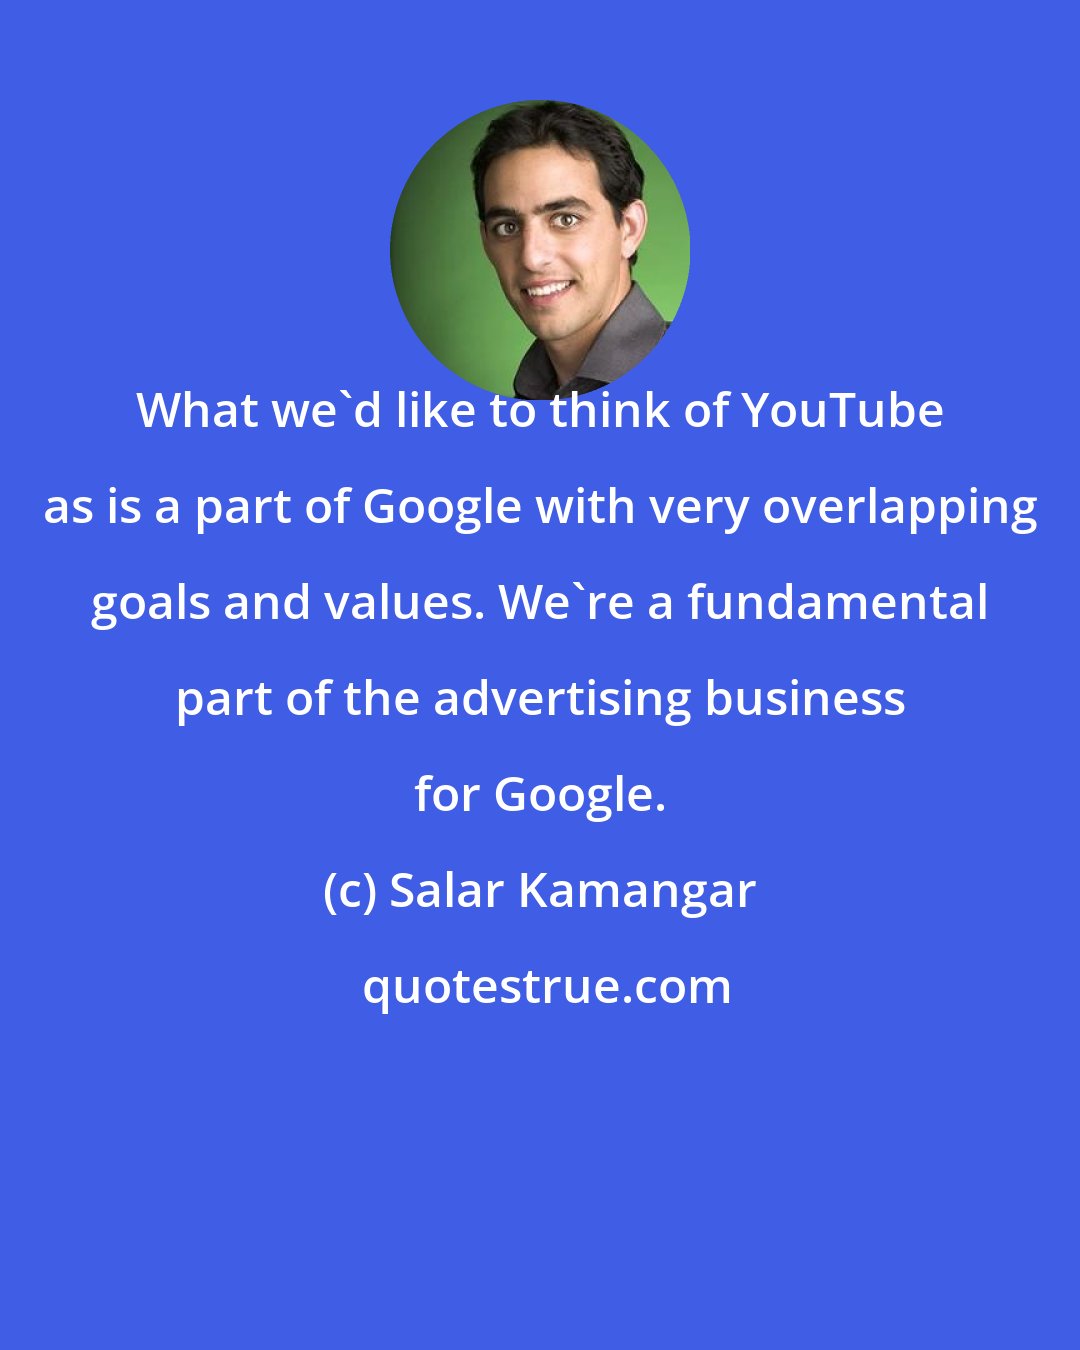 Salar Kamangar: What we'd like to think of YouTube as is a part of Google with very overlapping goals and values. We're a fundamental part of the advertising business for Google.